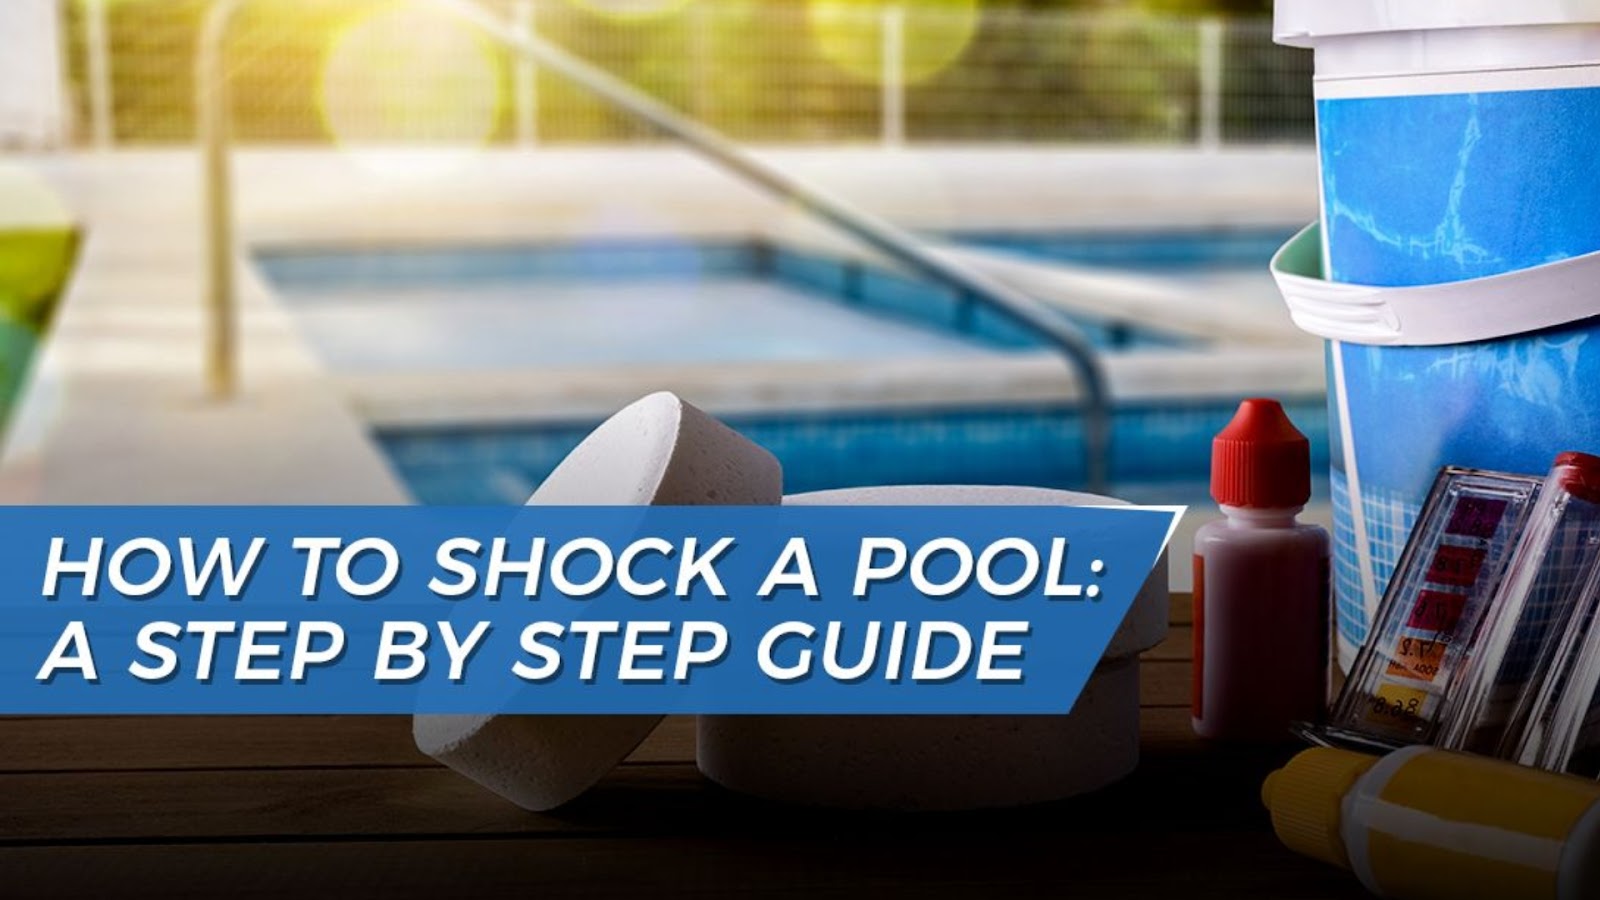 Step-by-Step Guide: How to Shock a Pool